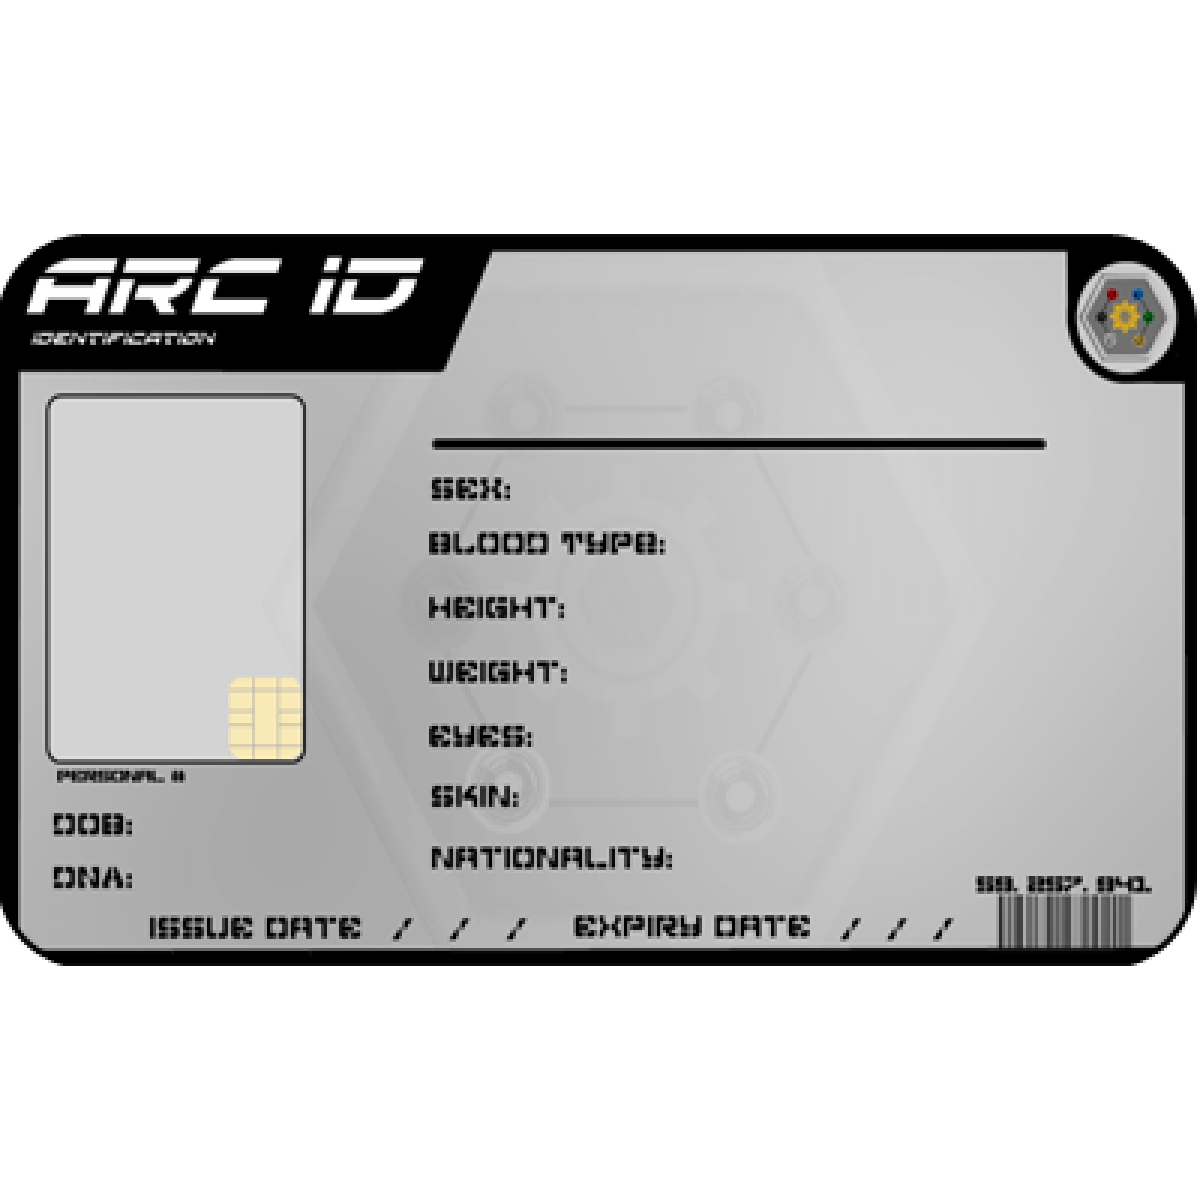 22 Spy Id Card Template Formating with Spy Id Card Template Inside Spy Id Card Template